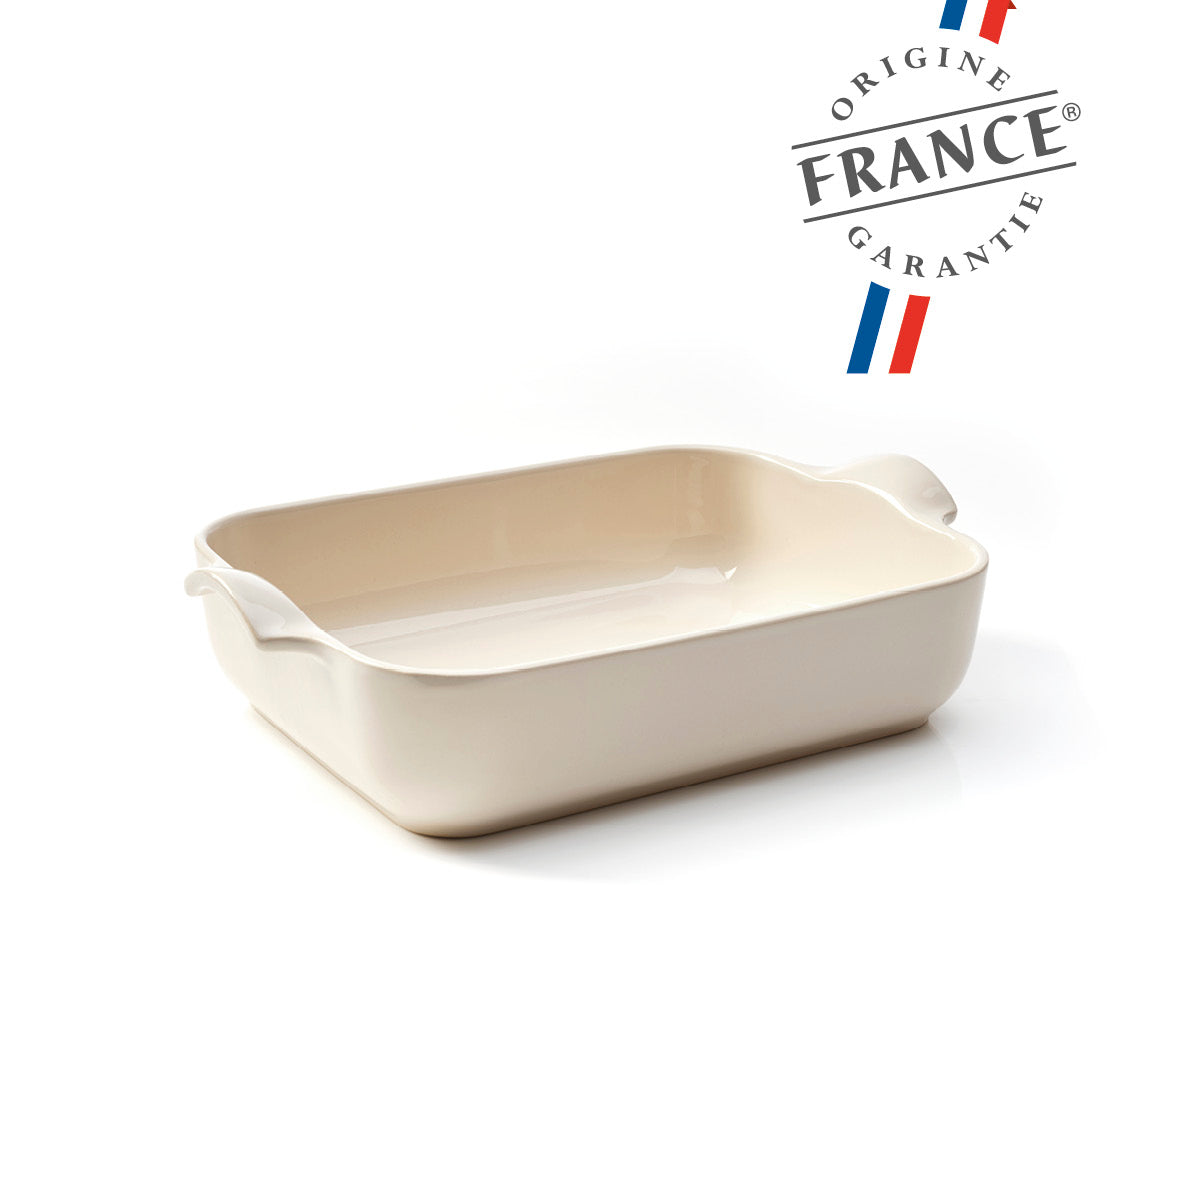 Ceramic oven dish - Made in France - 5L - 6-8 people Cream